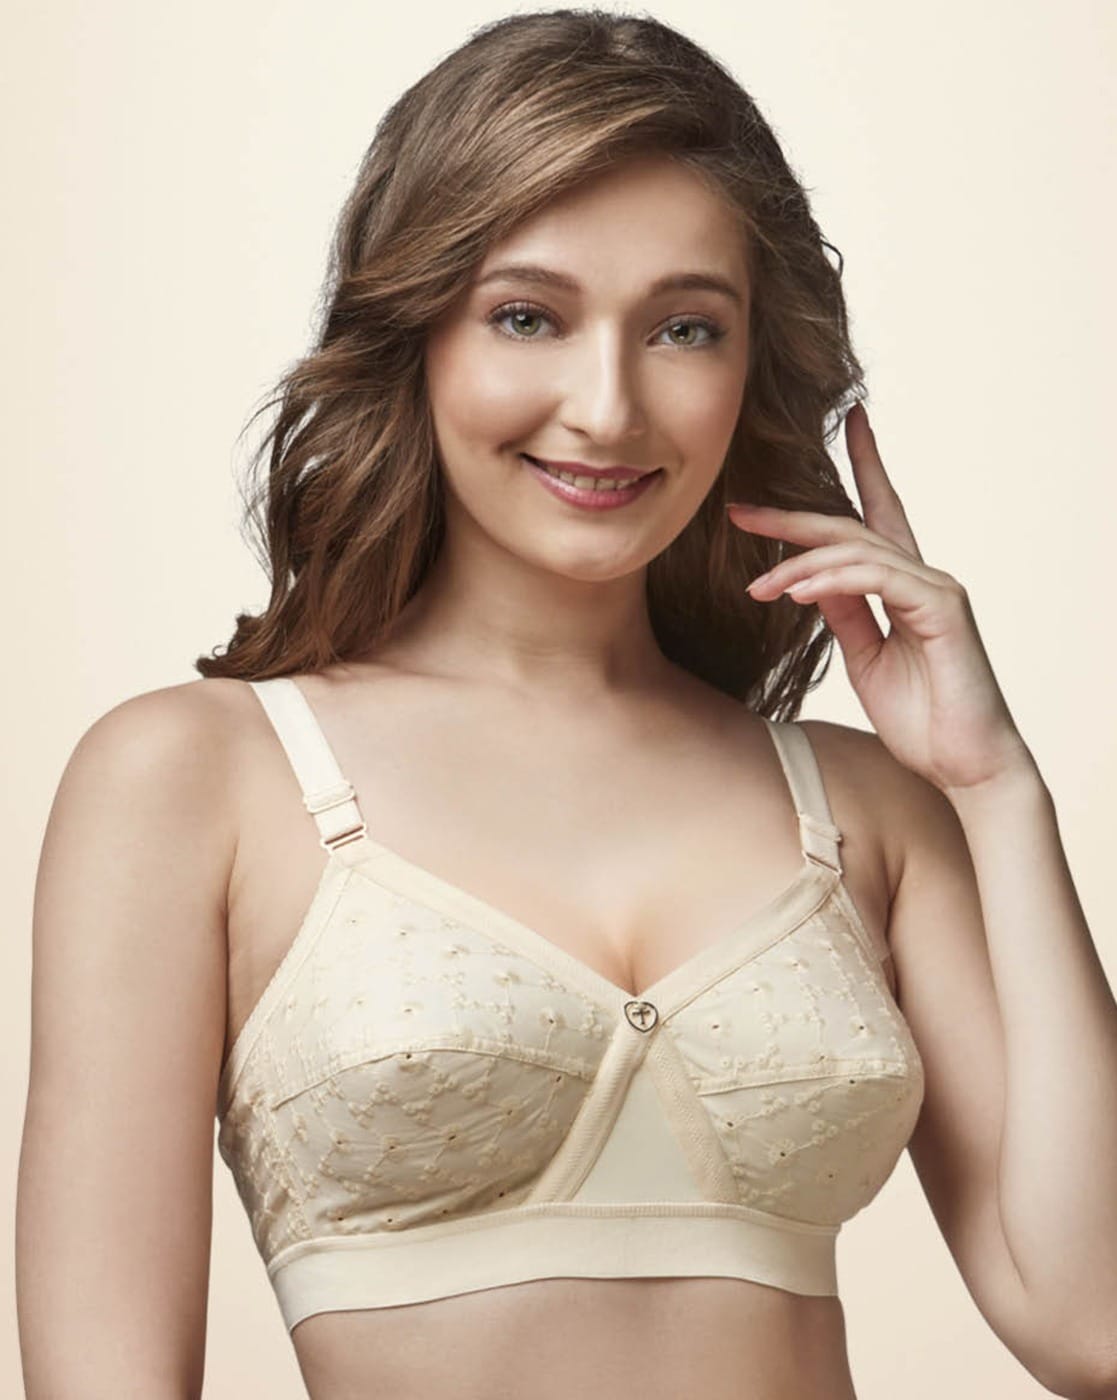 Buy online Full Coverage Minimizer Bra from lingerie for Women by Juliet  for ₹999 at 0% off